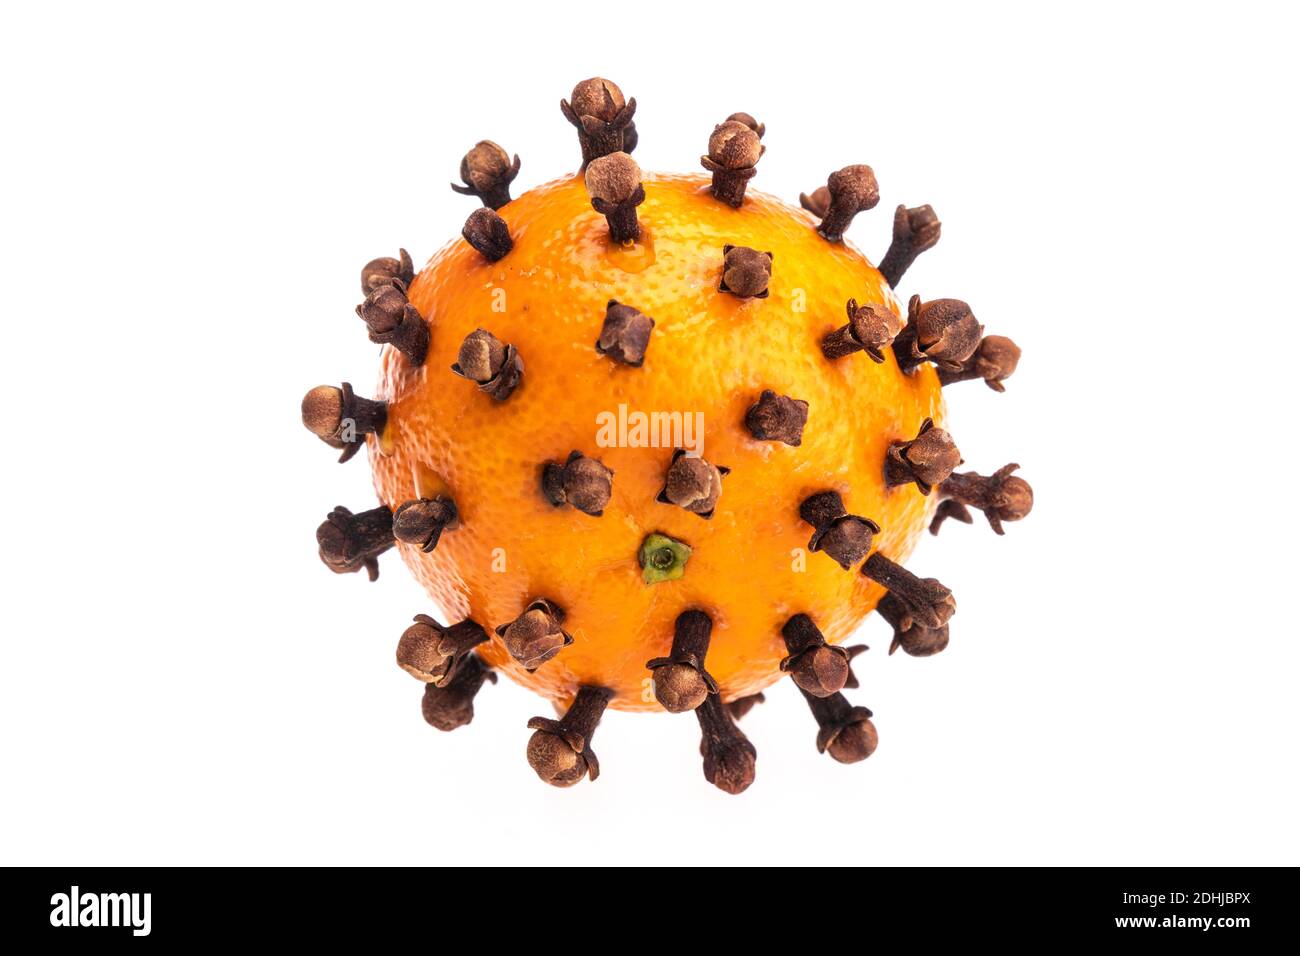 A satsuma srtuck with cloves for Christmas 2020 mulled wine - or as a tree ornament likely to go soggy very quickly. Clovid-19... Stock Photo